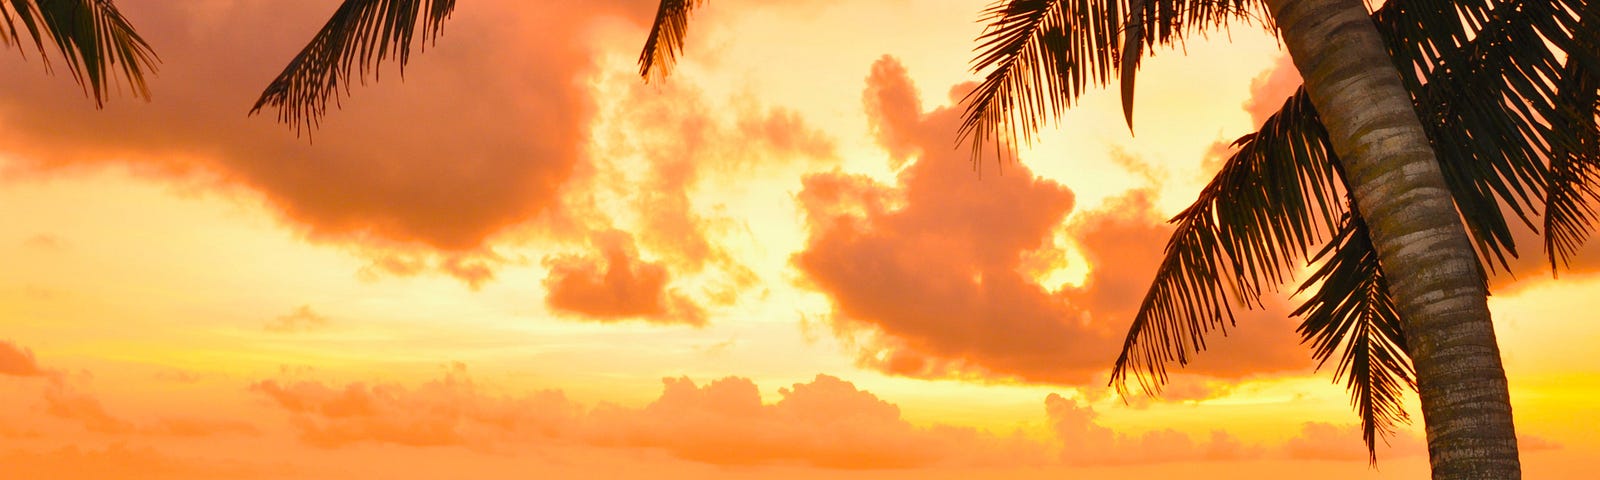 A sunrise of orange and gold at the beach with palm trees in the foreground